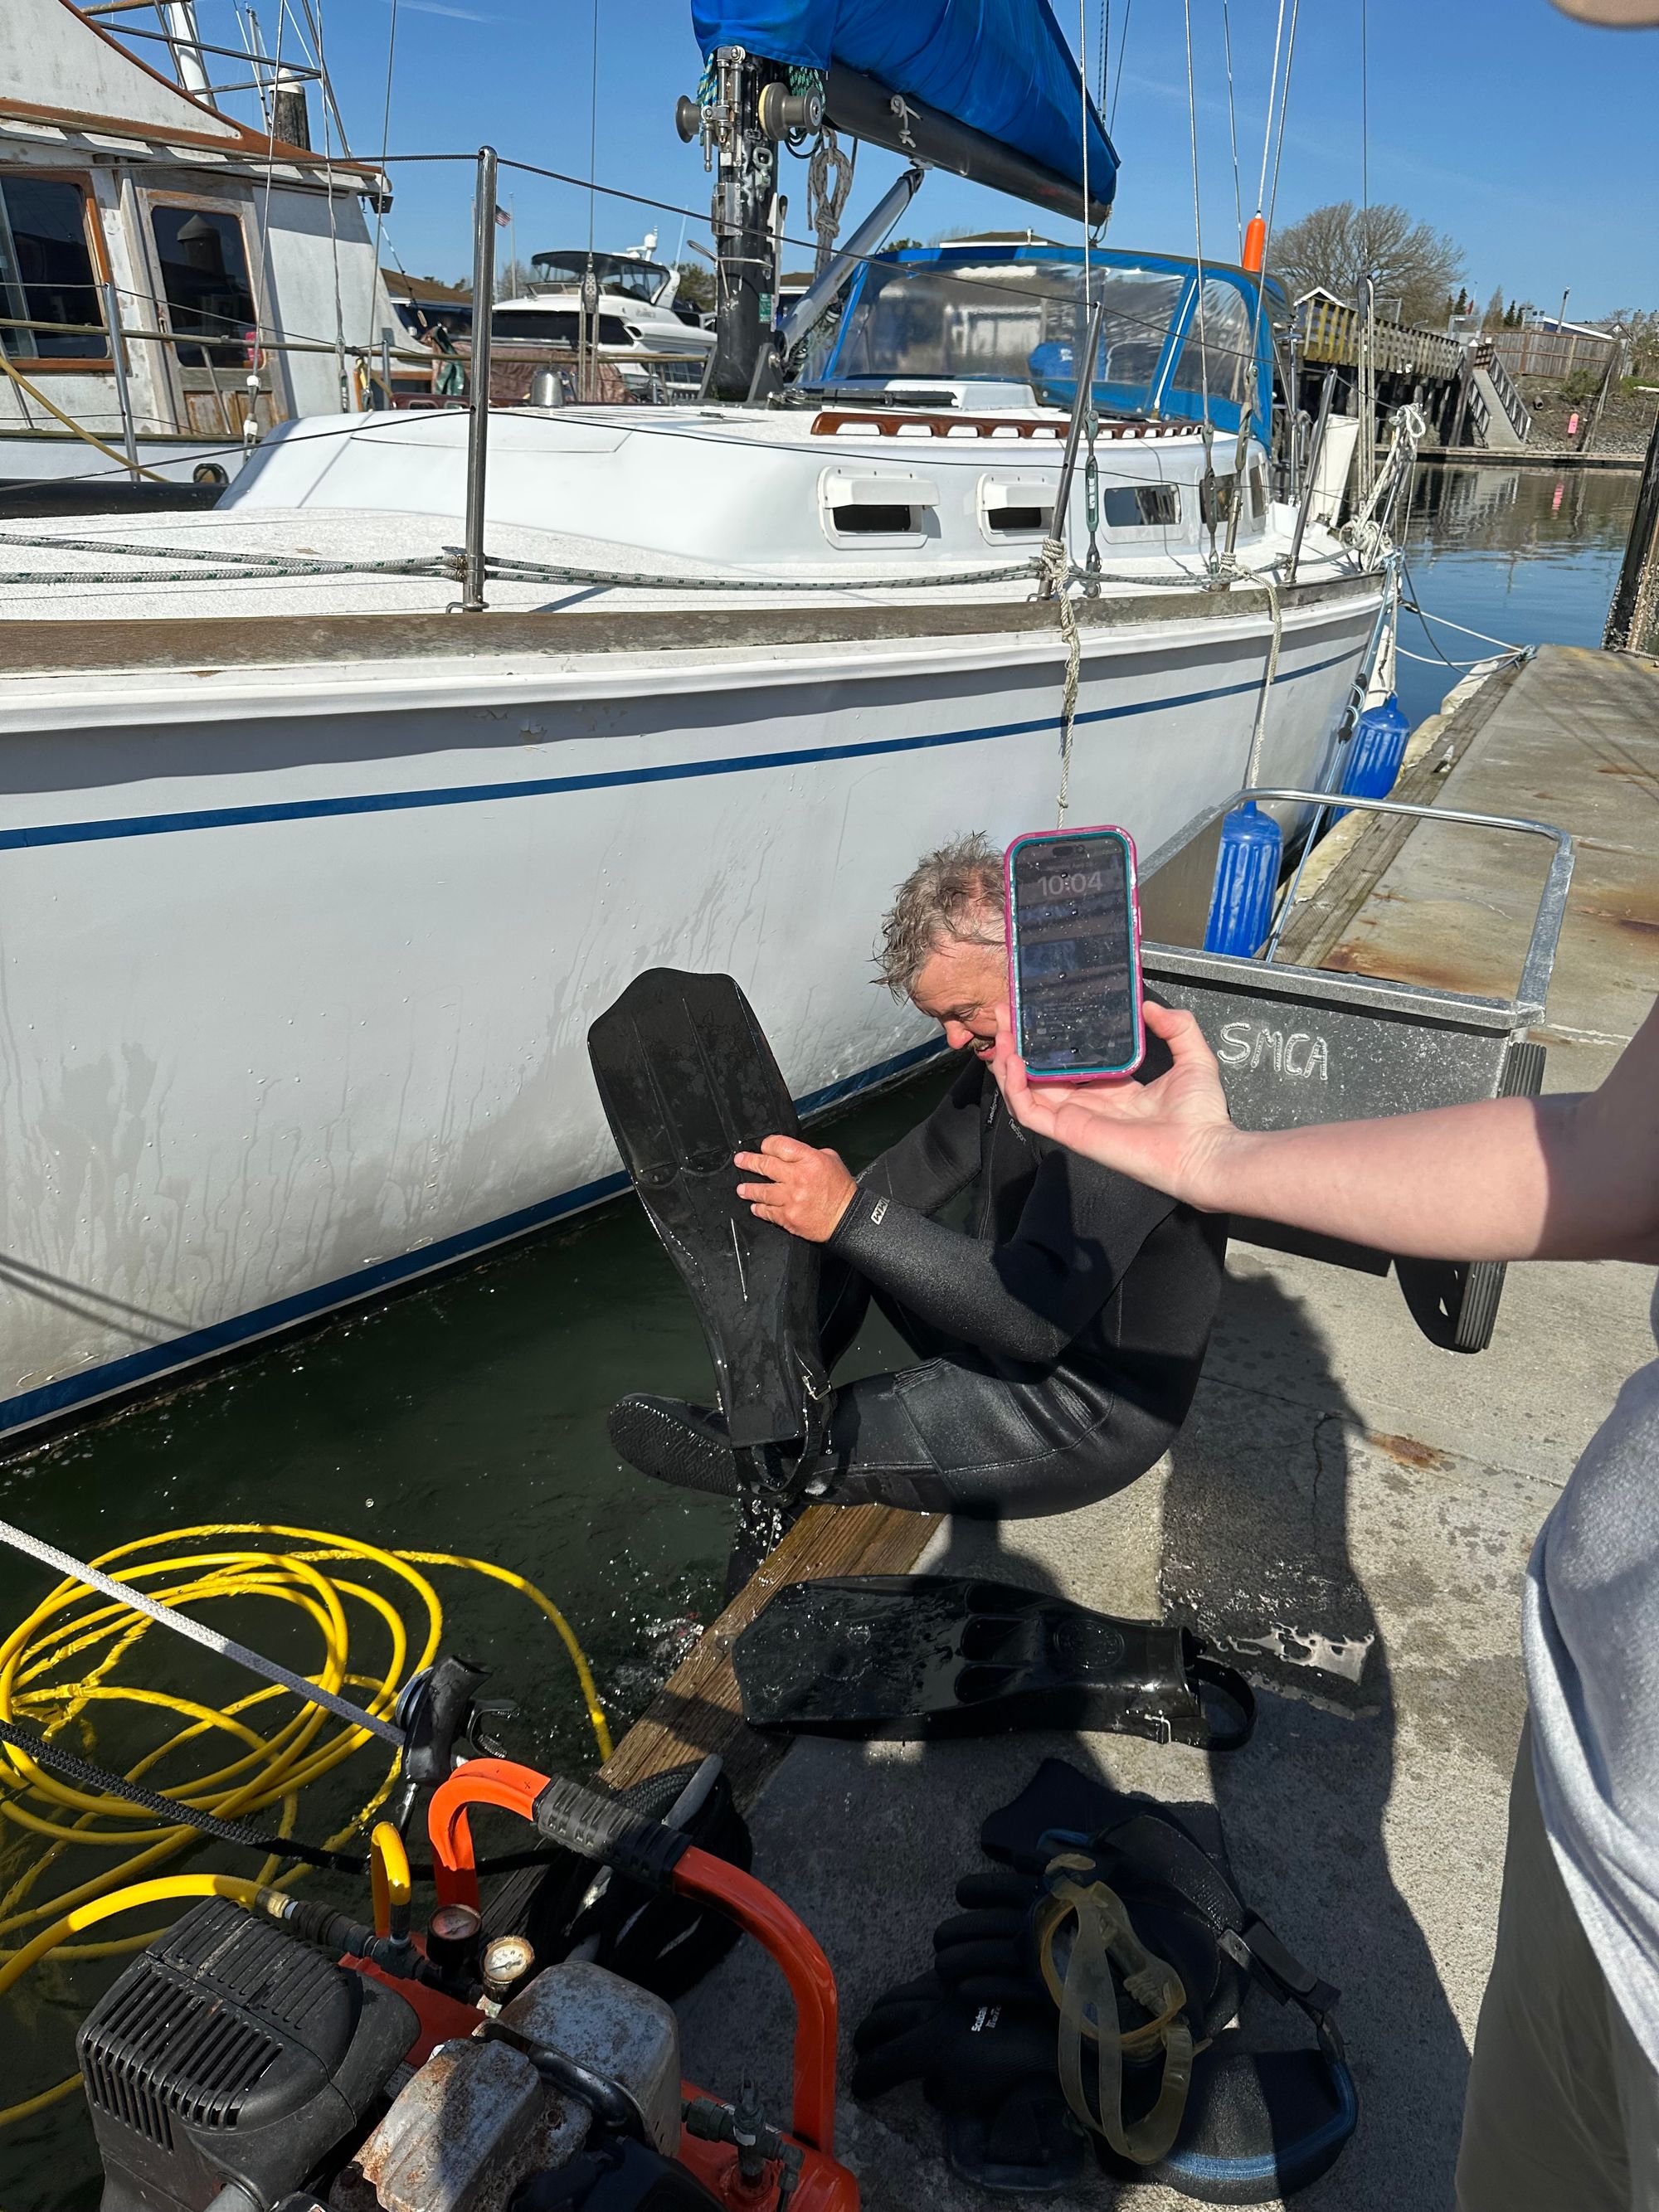 Can an iPhone Survive in Salt Water?